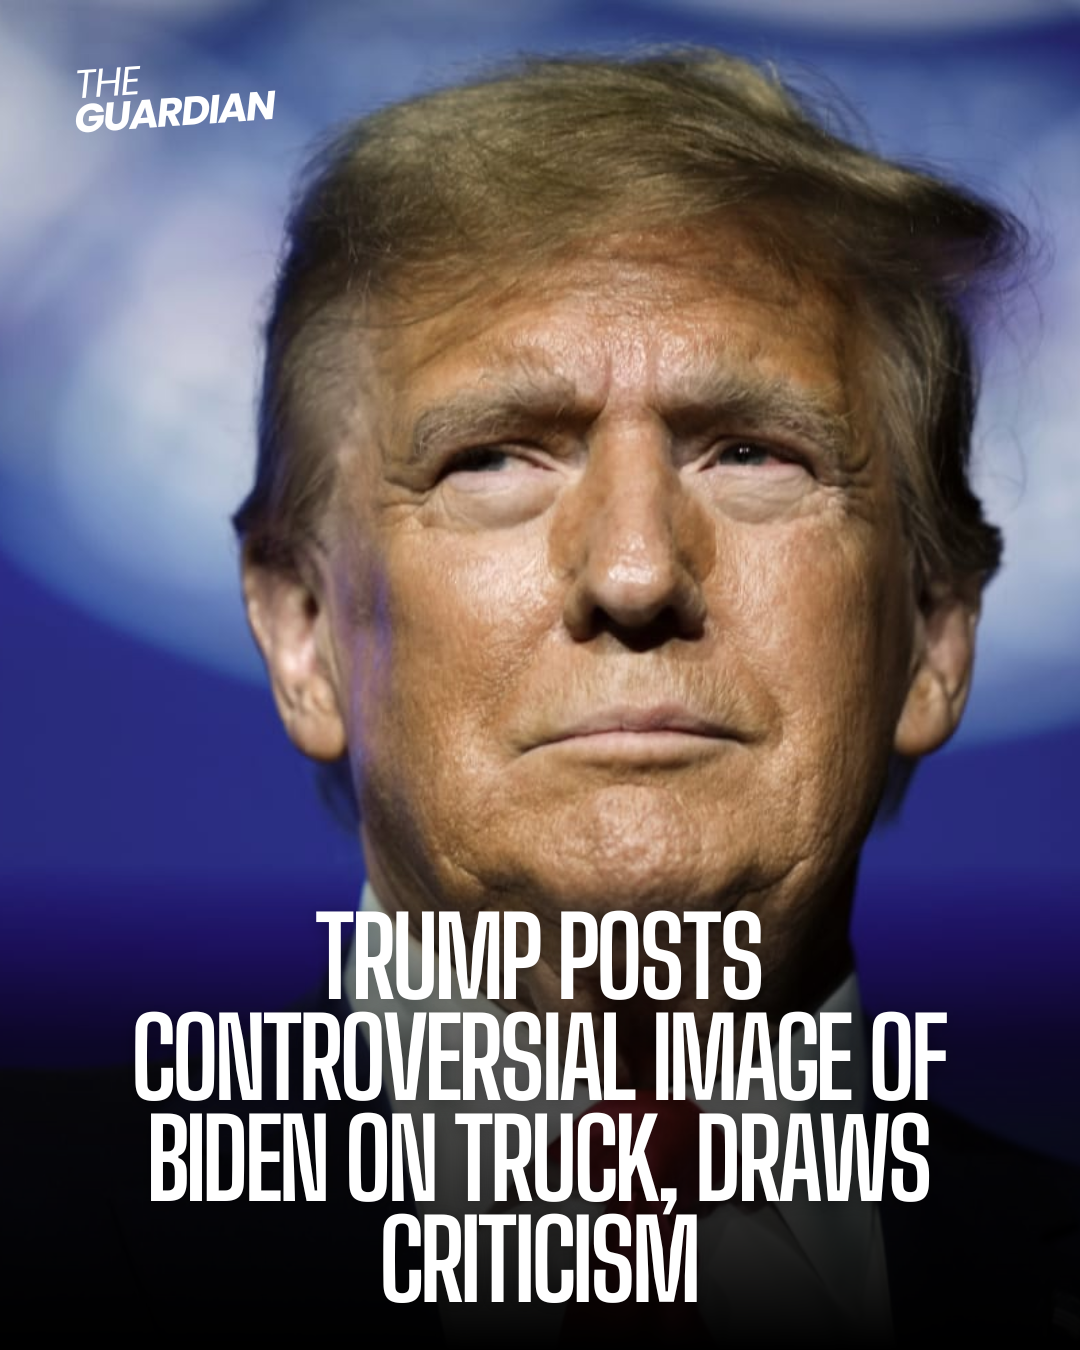 Biden's campaign communications chief says the picture could be construed as suggesting physical damage toward the president.